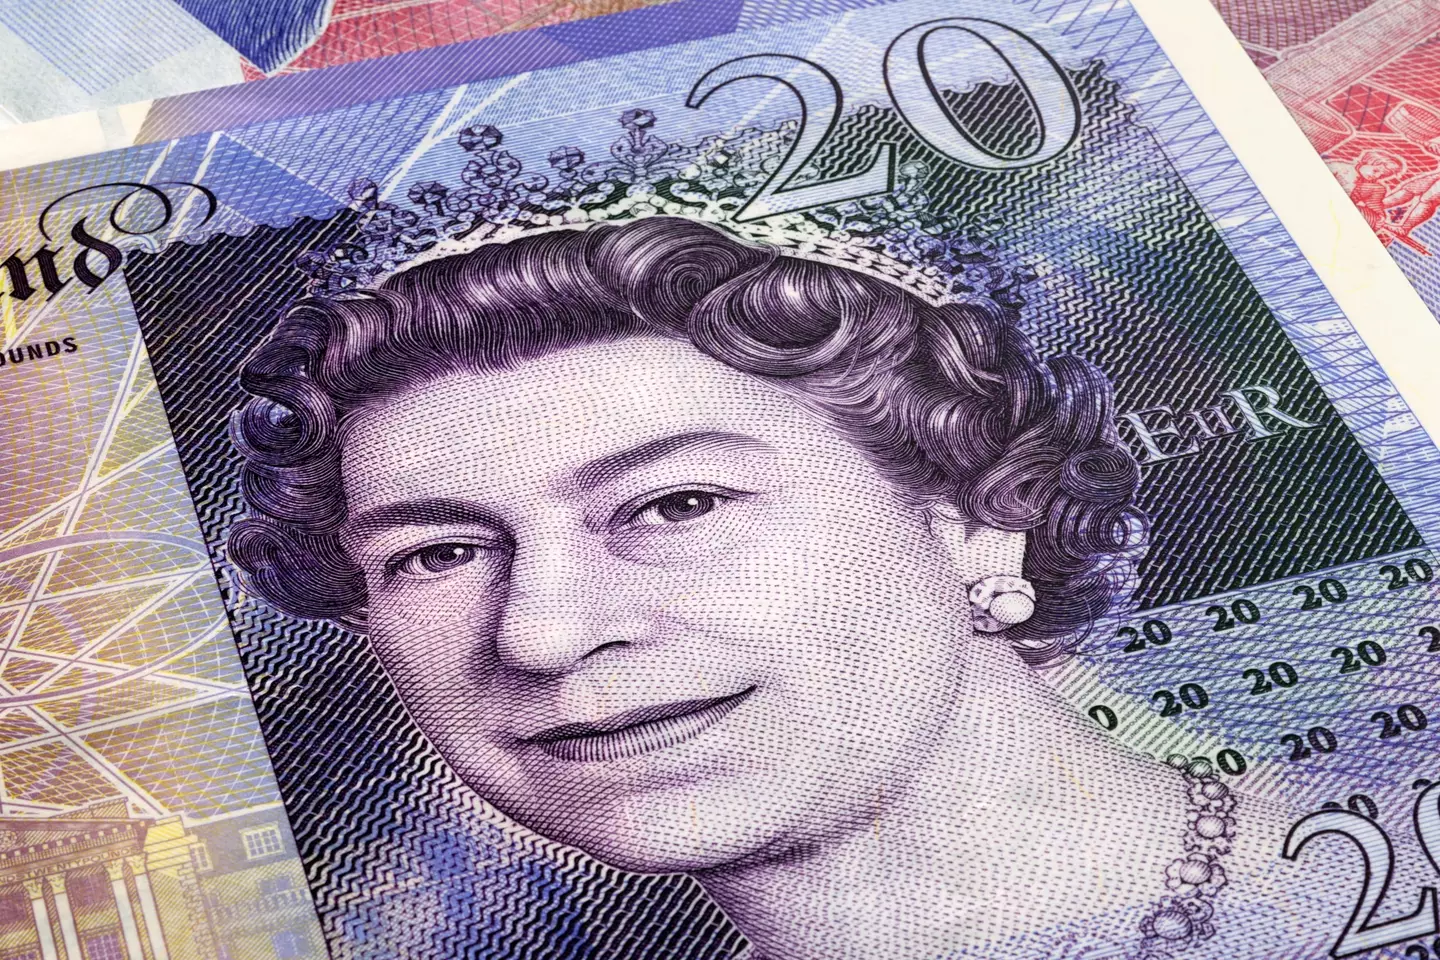 You can exchange paper £20 notes for polymer ones at your bank. (